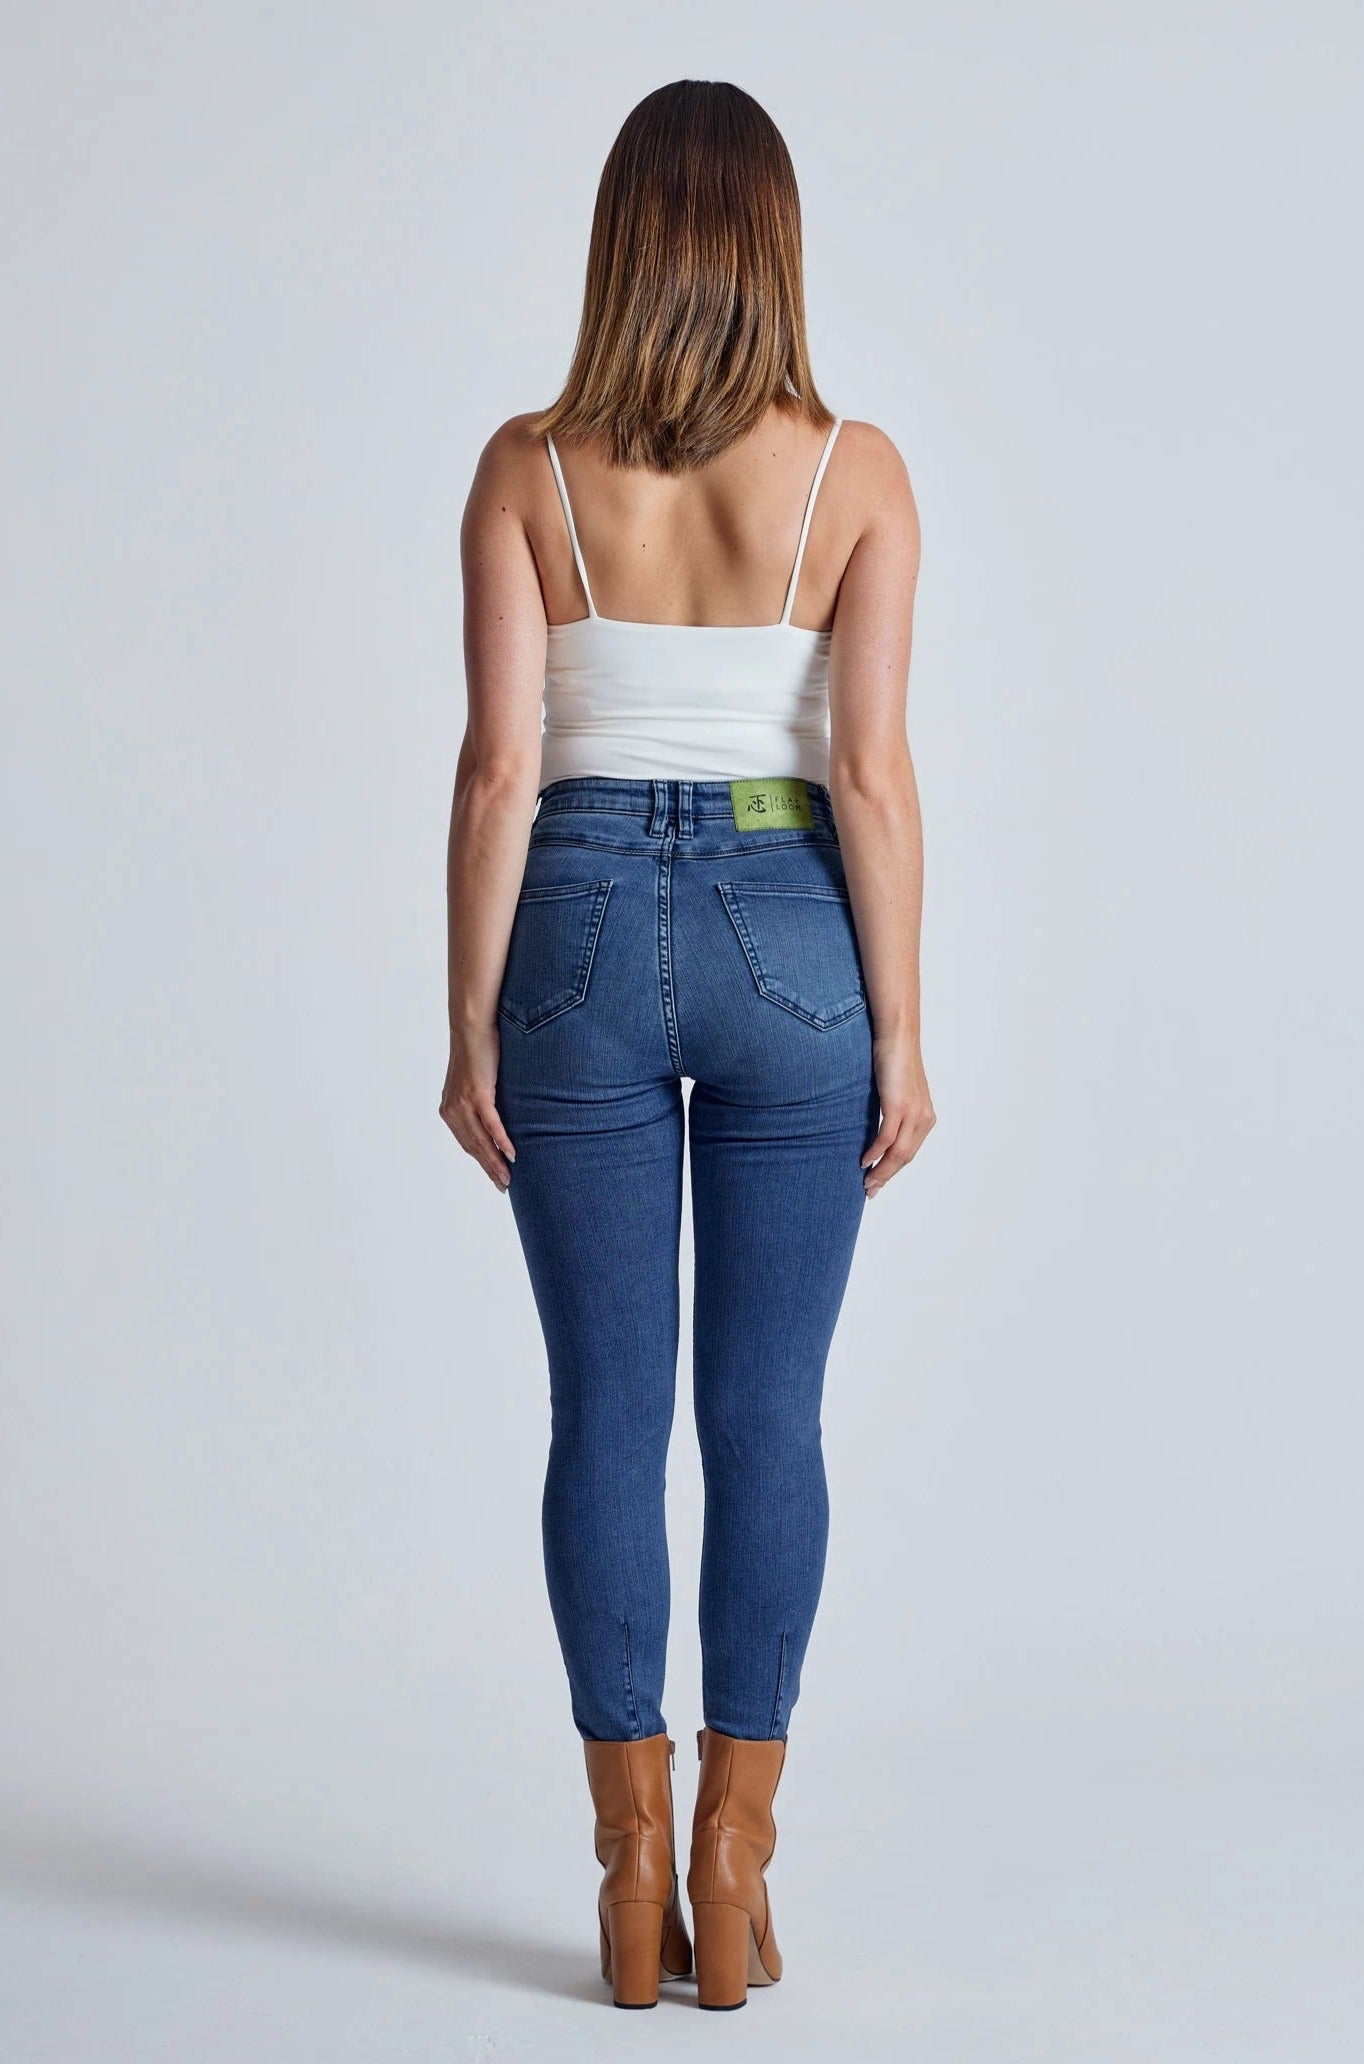 Azure Nina High Waisted Skinny Jeans - GOTS Certified Organic Cotton and Recycled Polyester